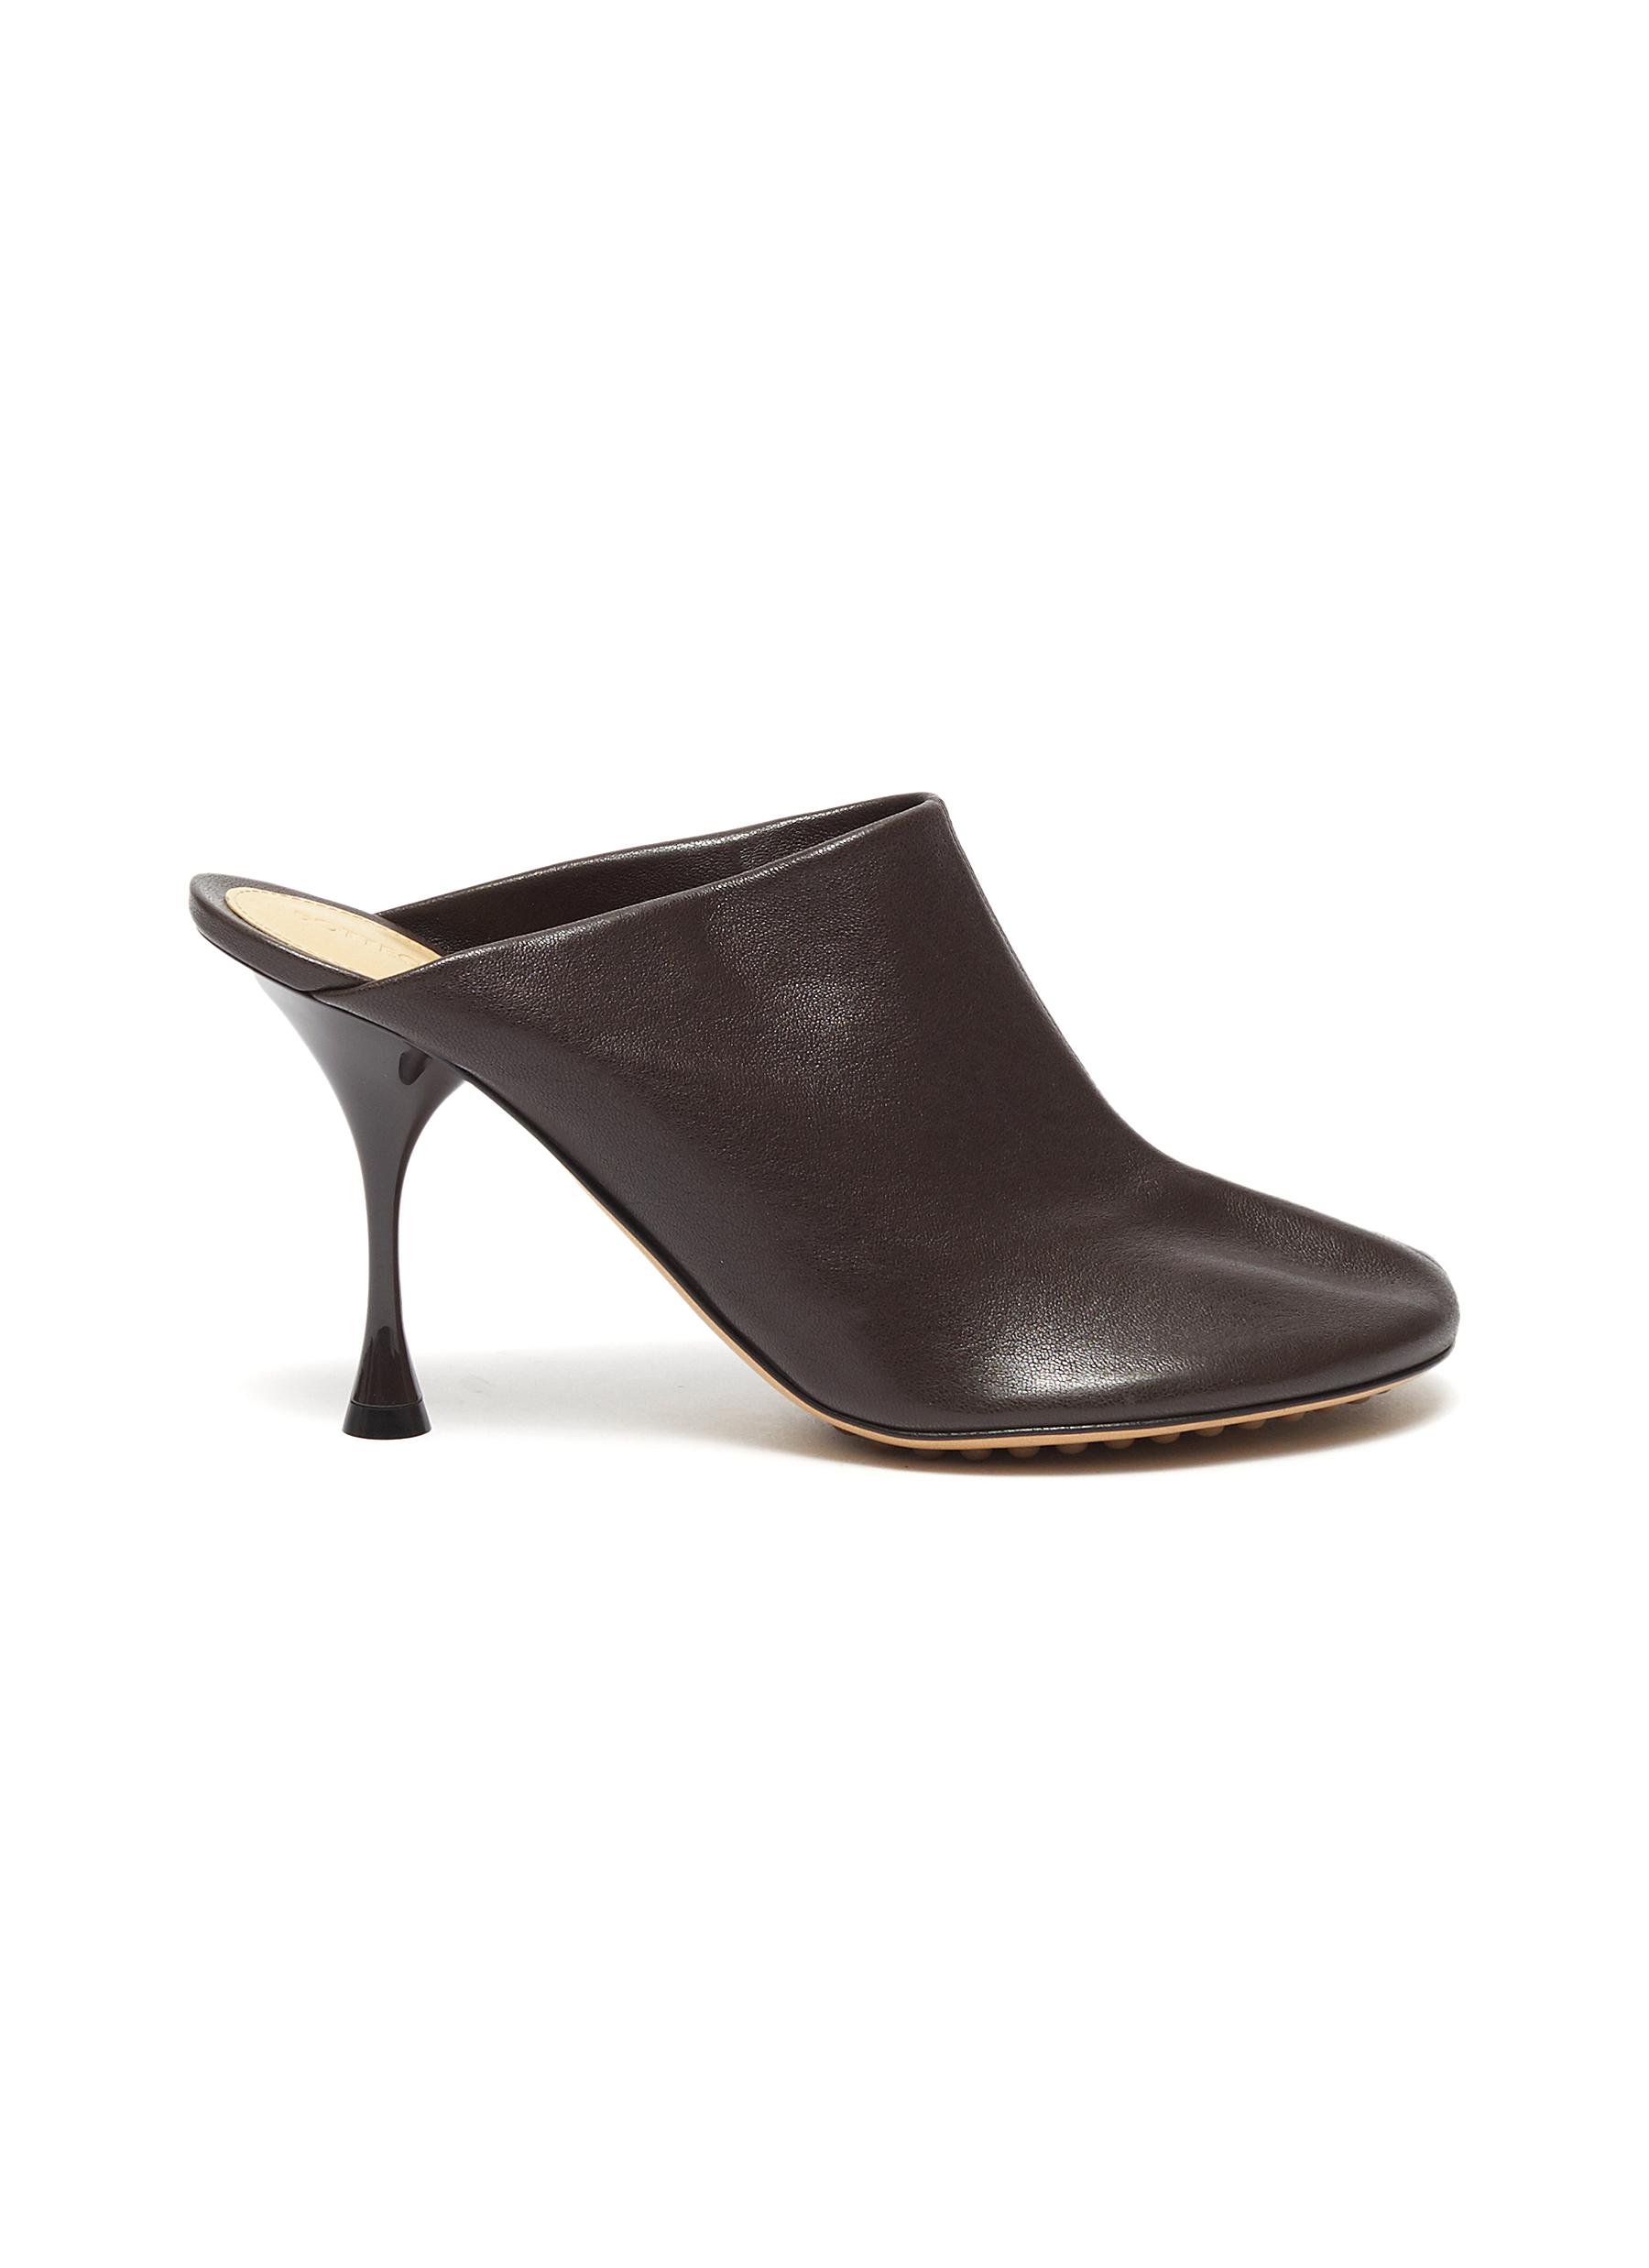 Stretch Leather Slip-on Heeled Mules